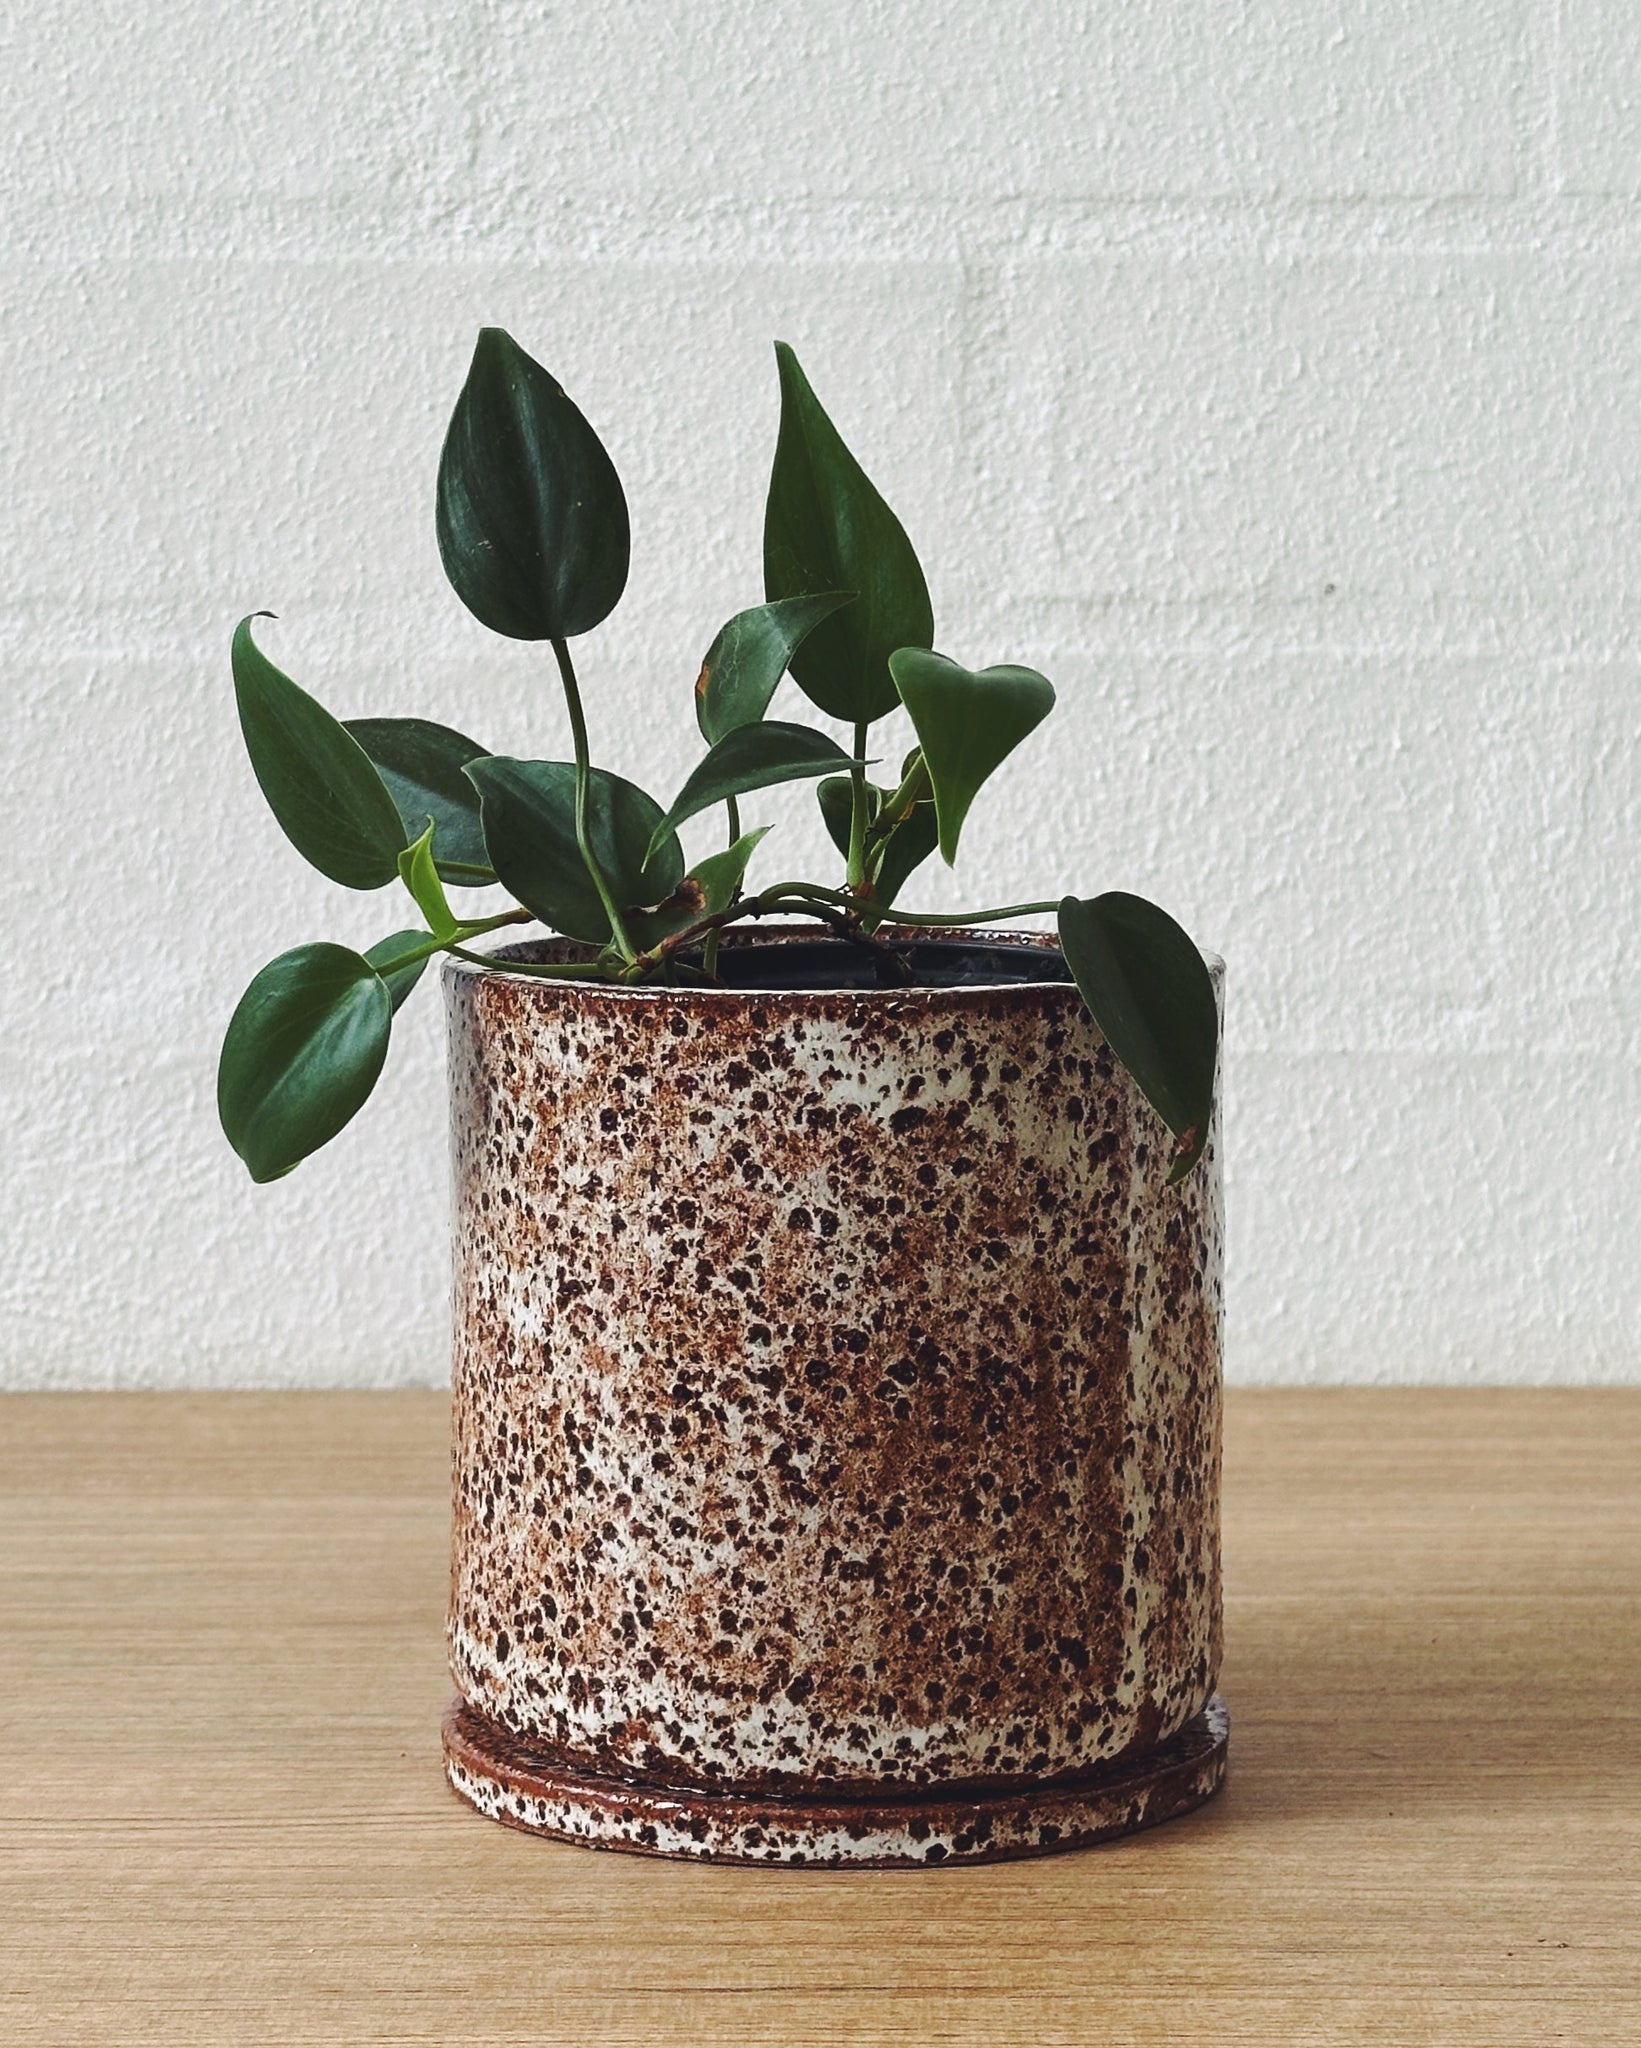 Saturday 16th March: Design and create your perfect planter (3 hour workshop)